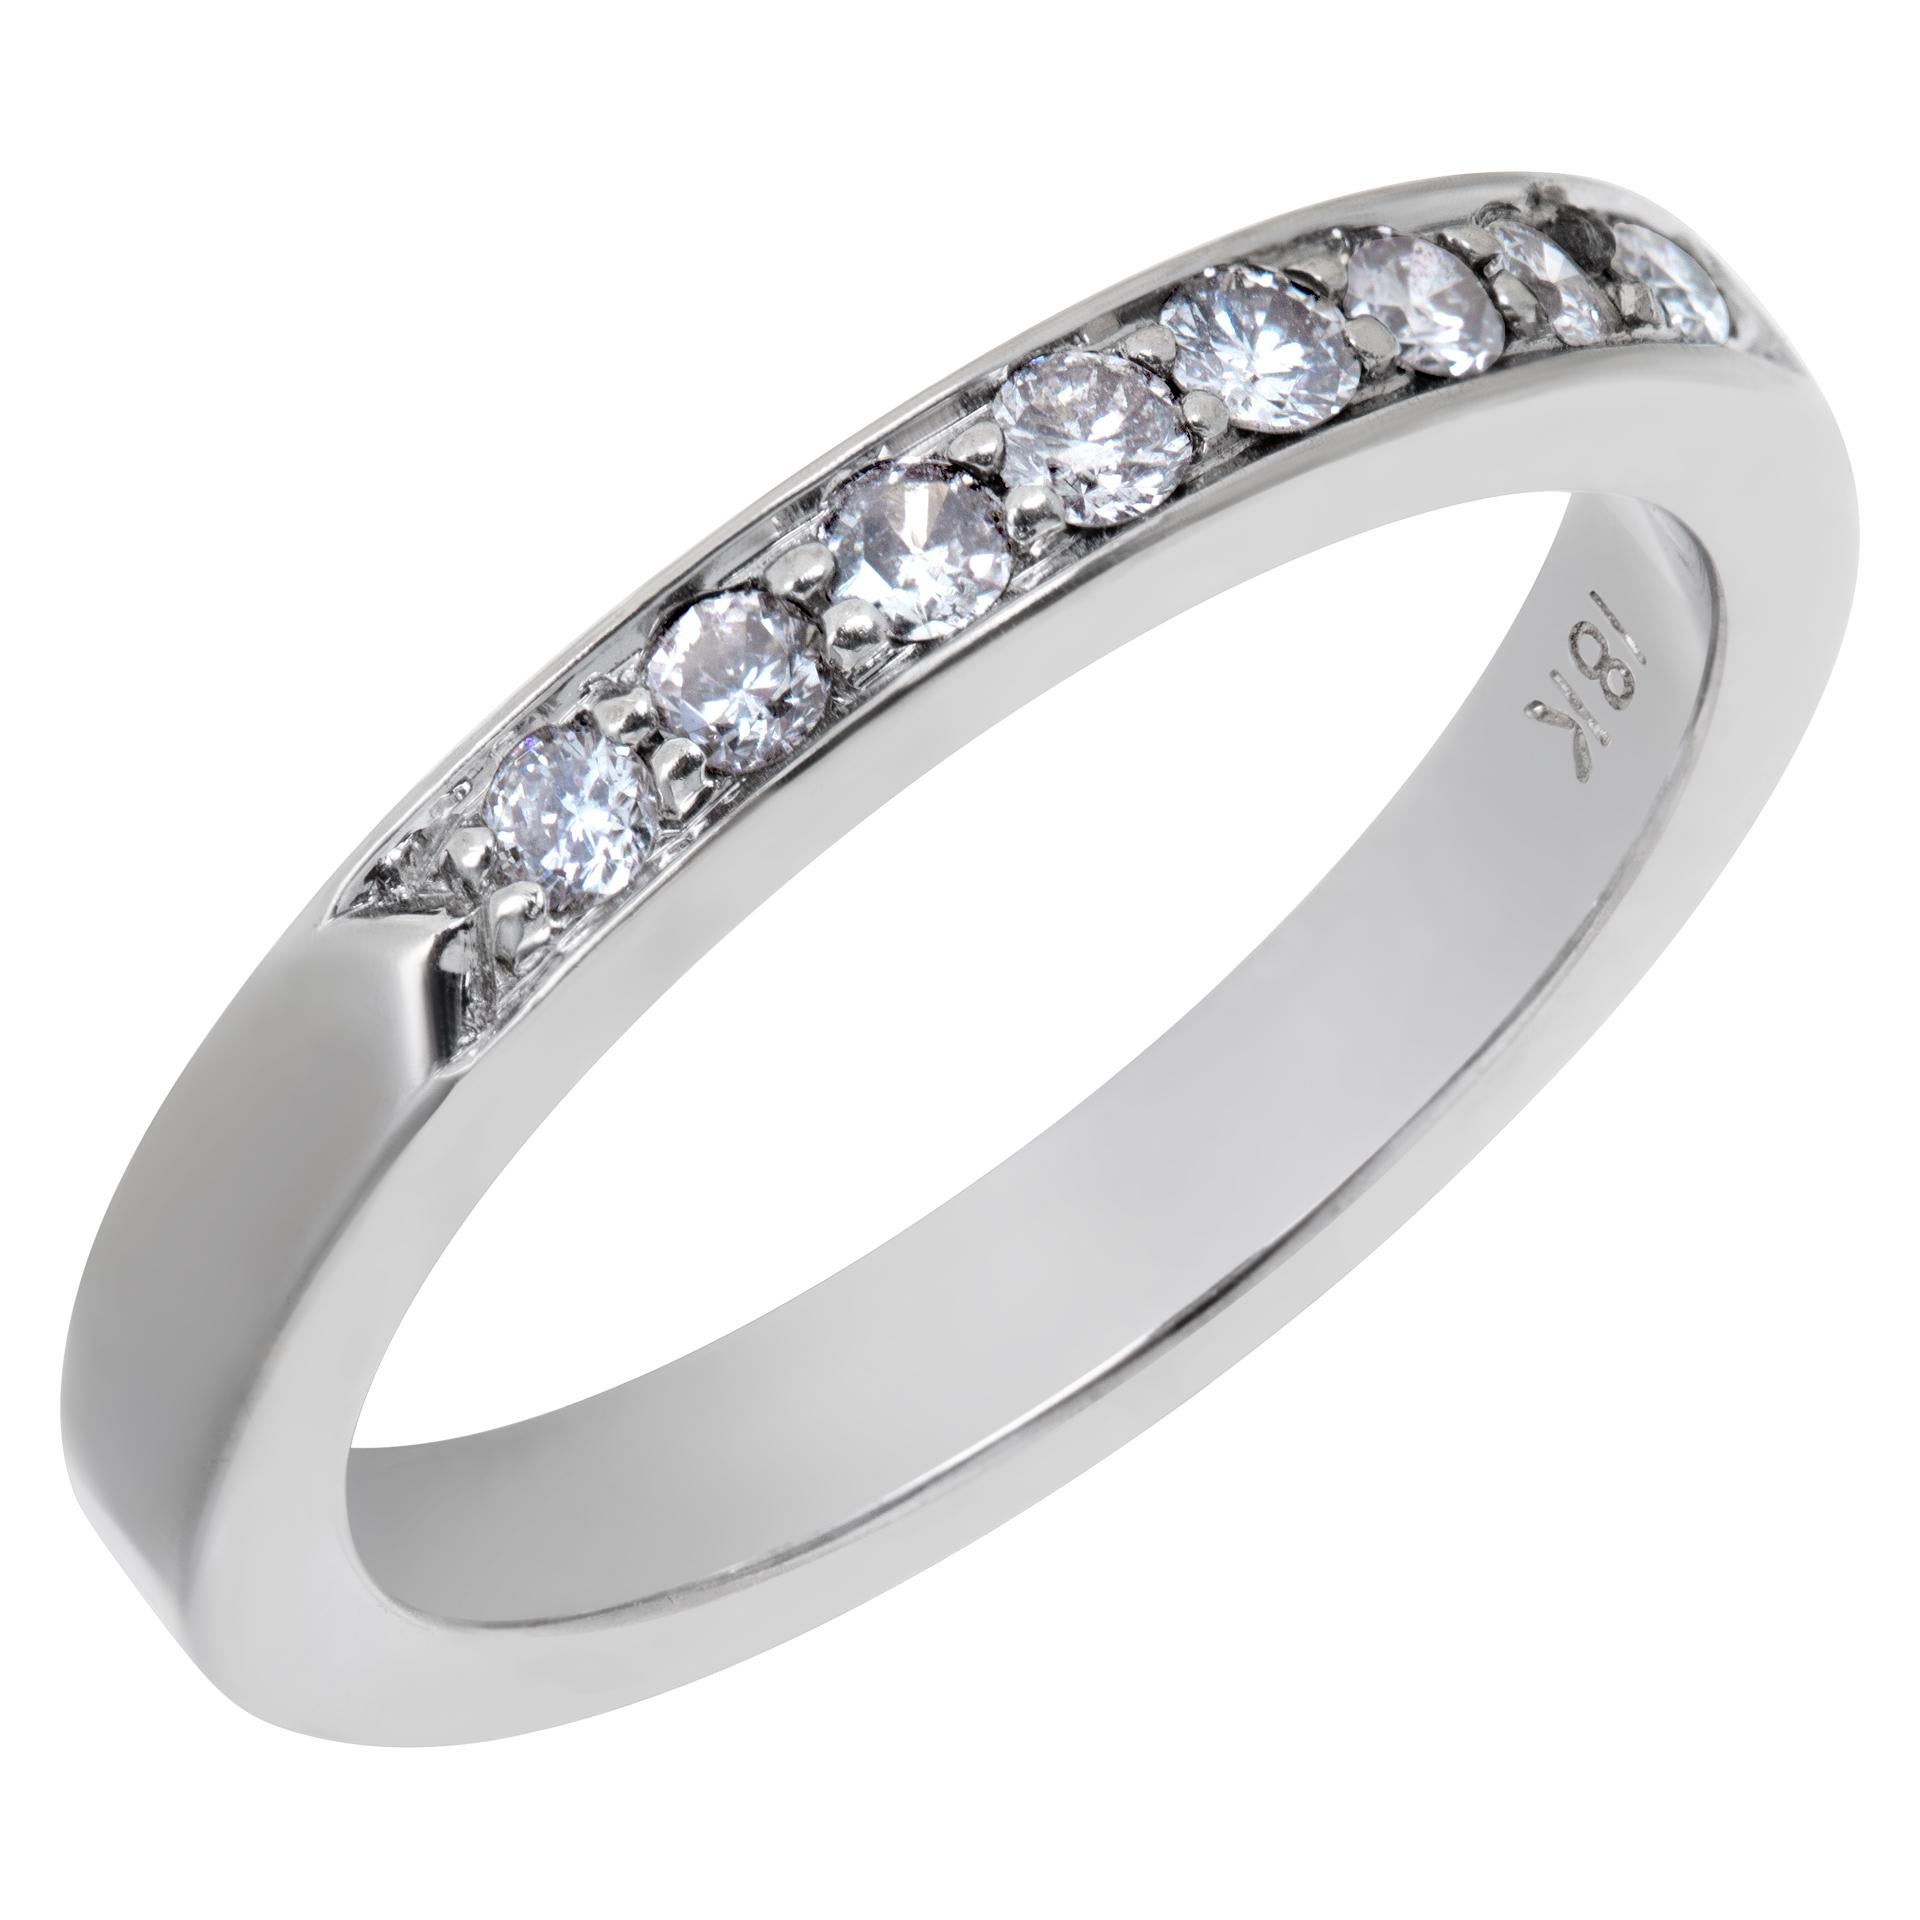 Semi-eternity diamond ring in white gold w/ approx 0.50 cts in diamonds In Excellent Condition For Sale In Surfside, FL